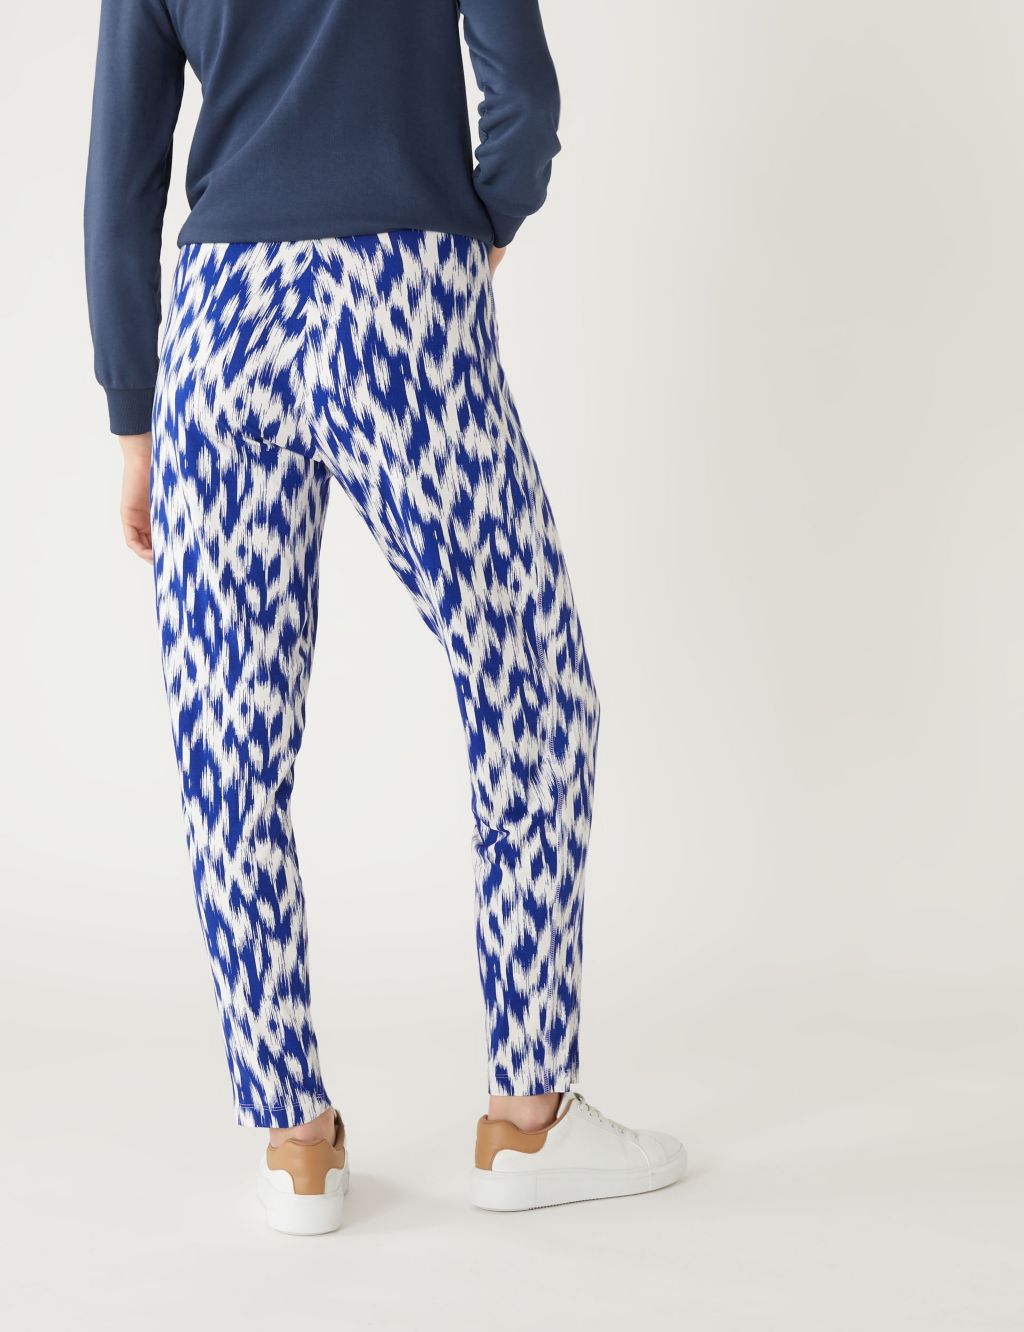 Jersey Printed Tapered Trousers image 4